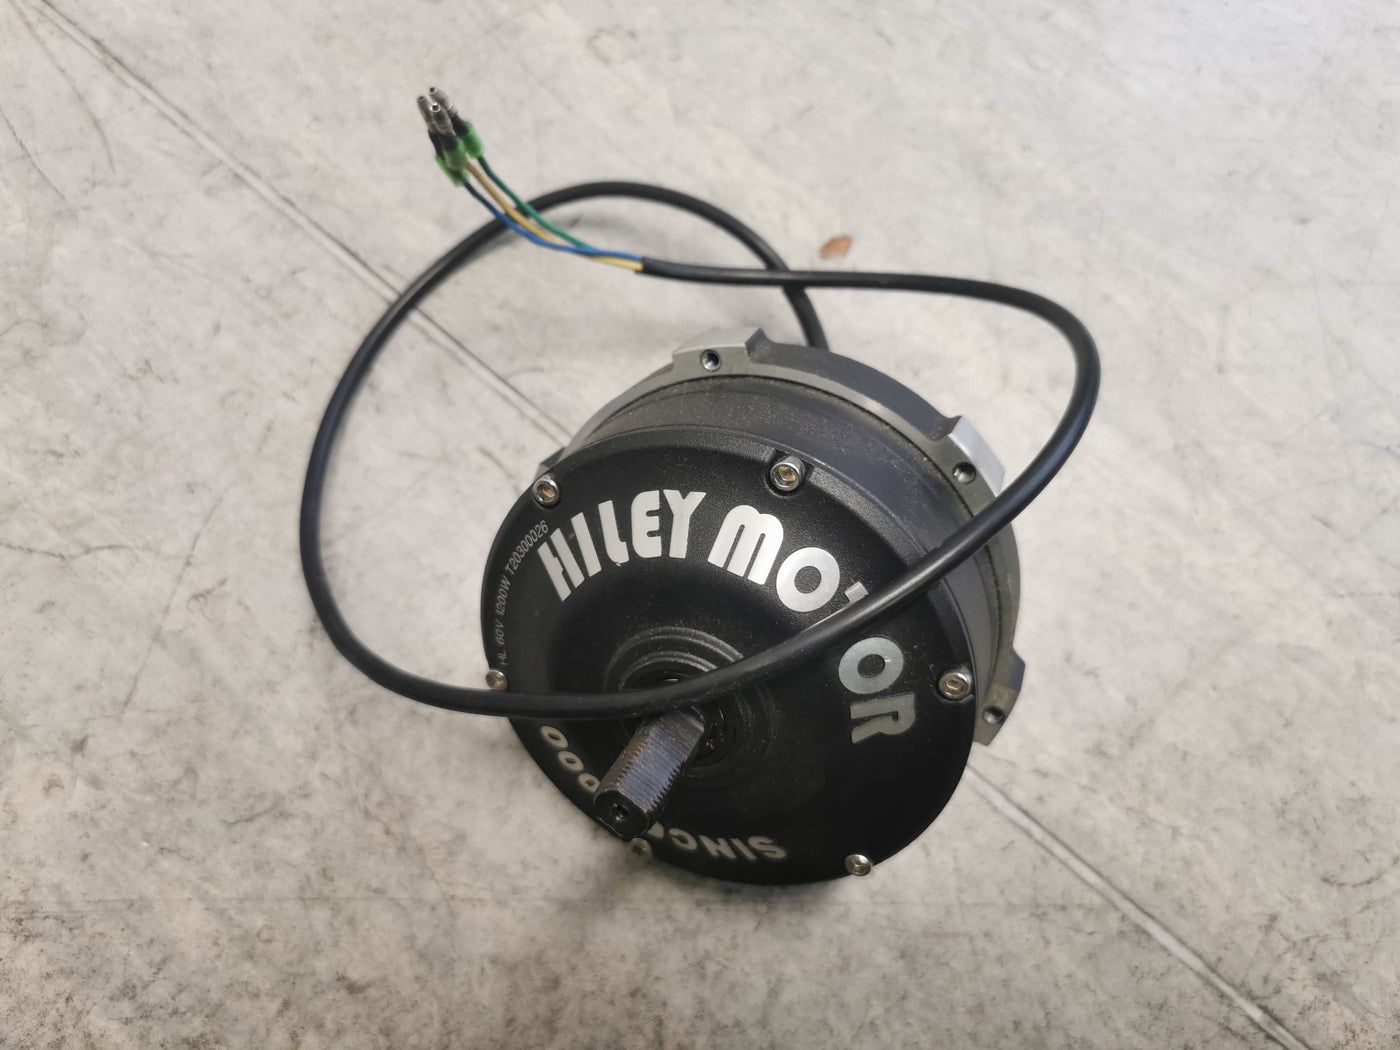 Hiley T10 Or T9 motor